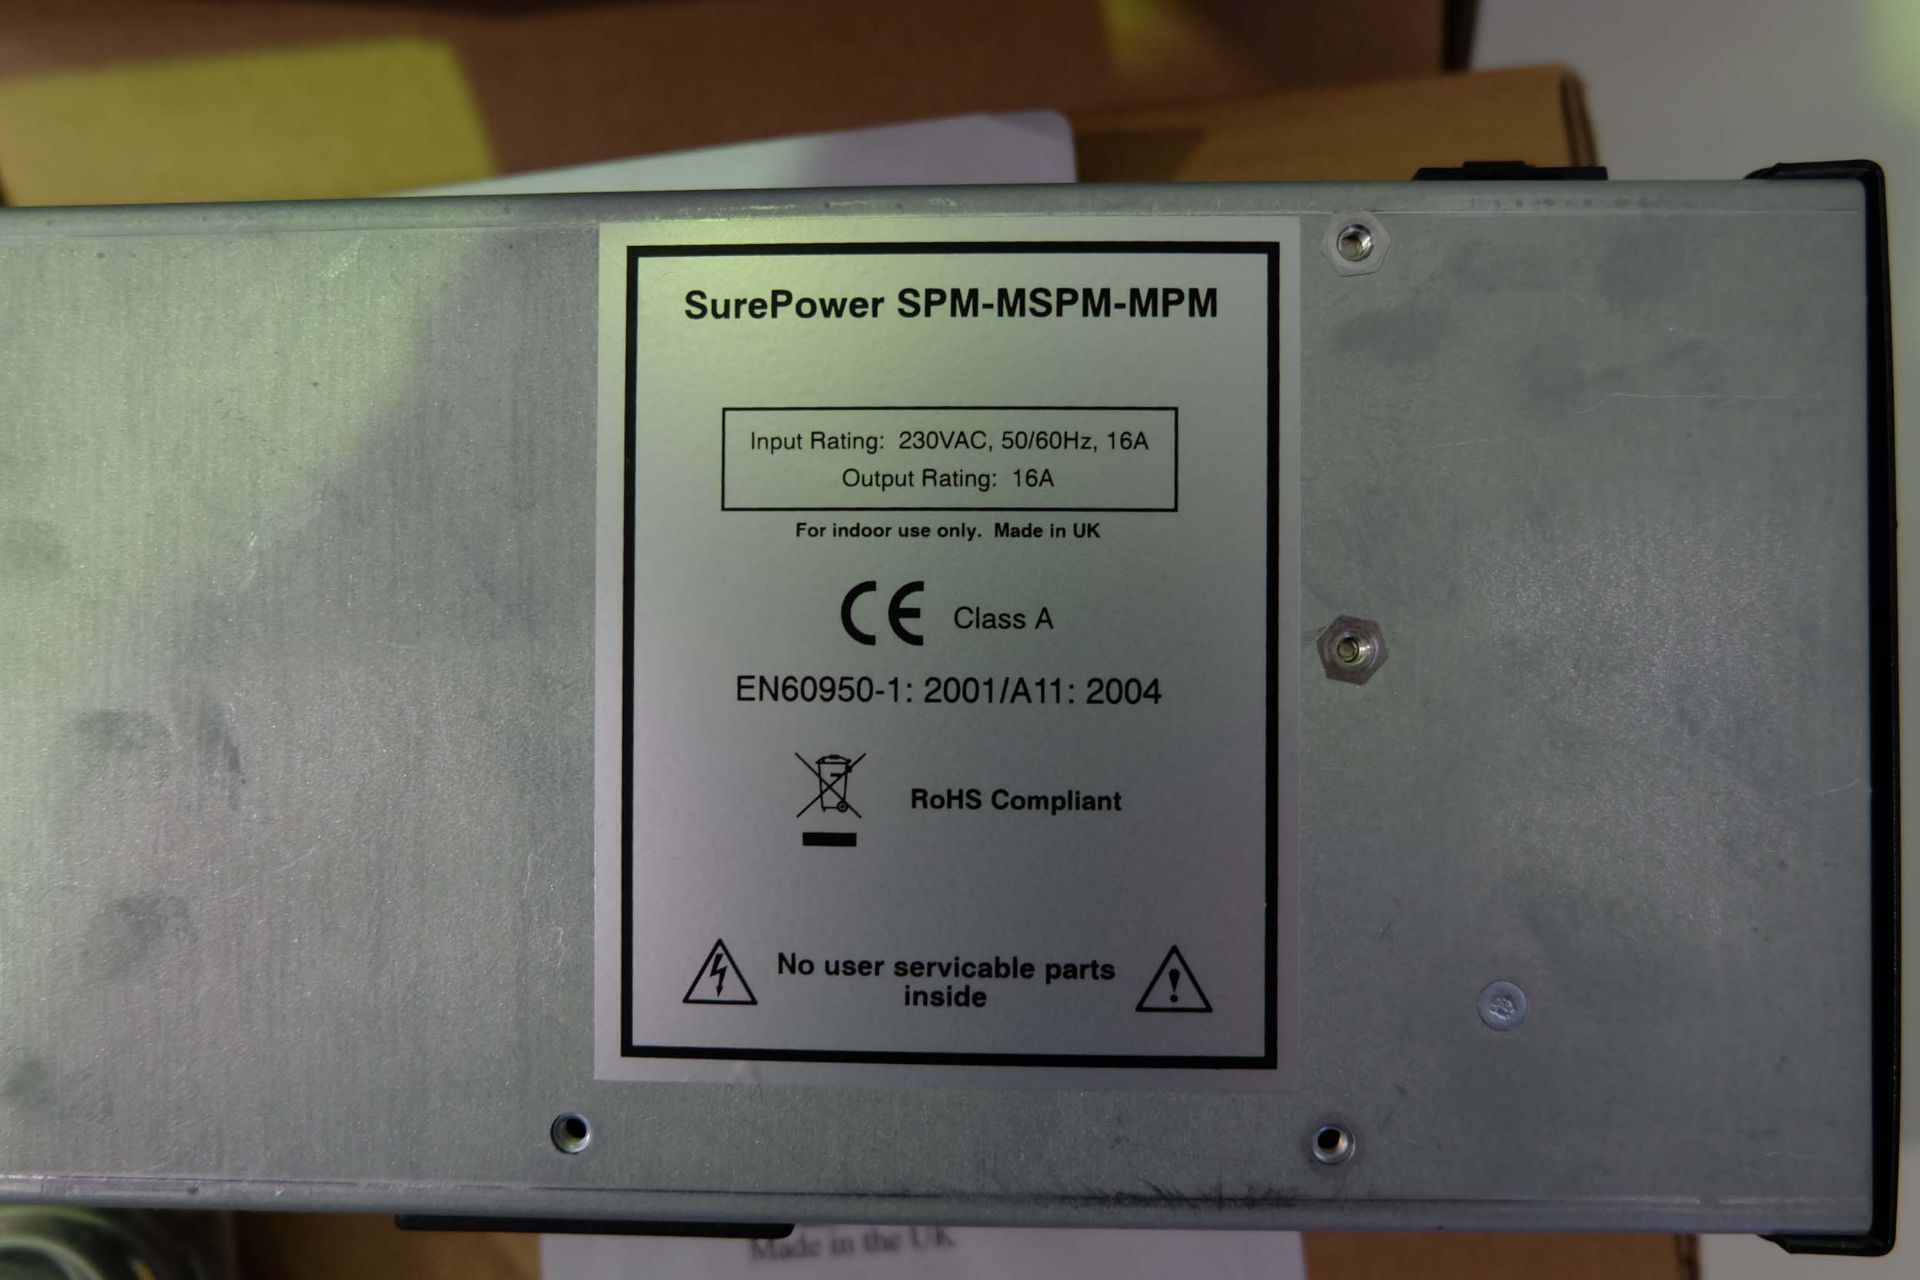 8 x Sure Power -MSPM - 16 Power Packs With 16 Amp Circuit Breaker - Image 4 of 5